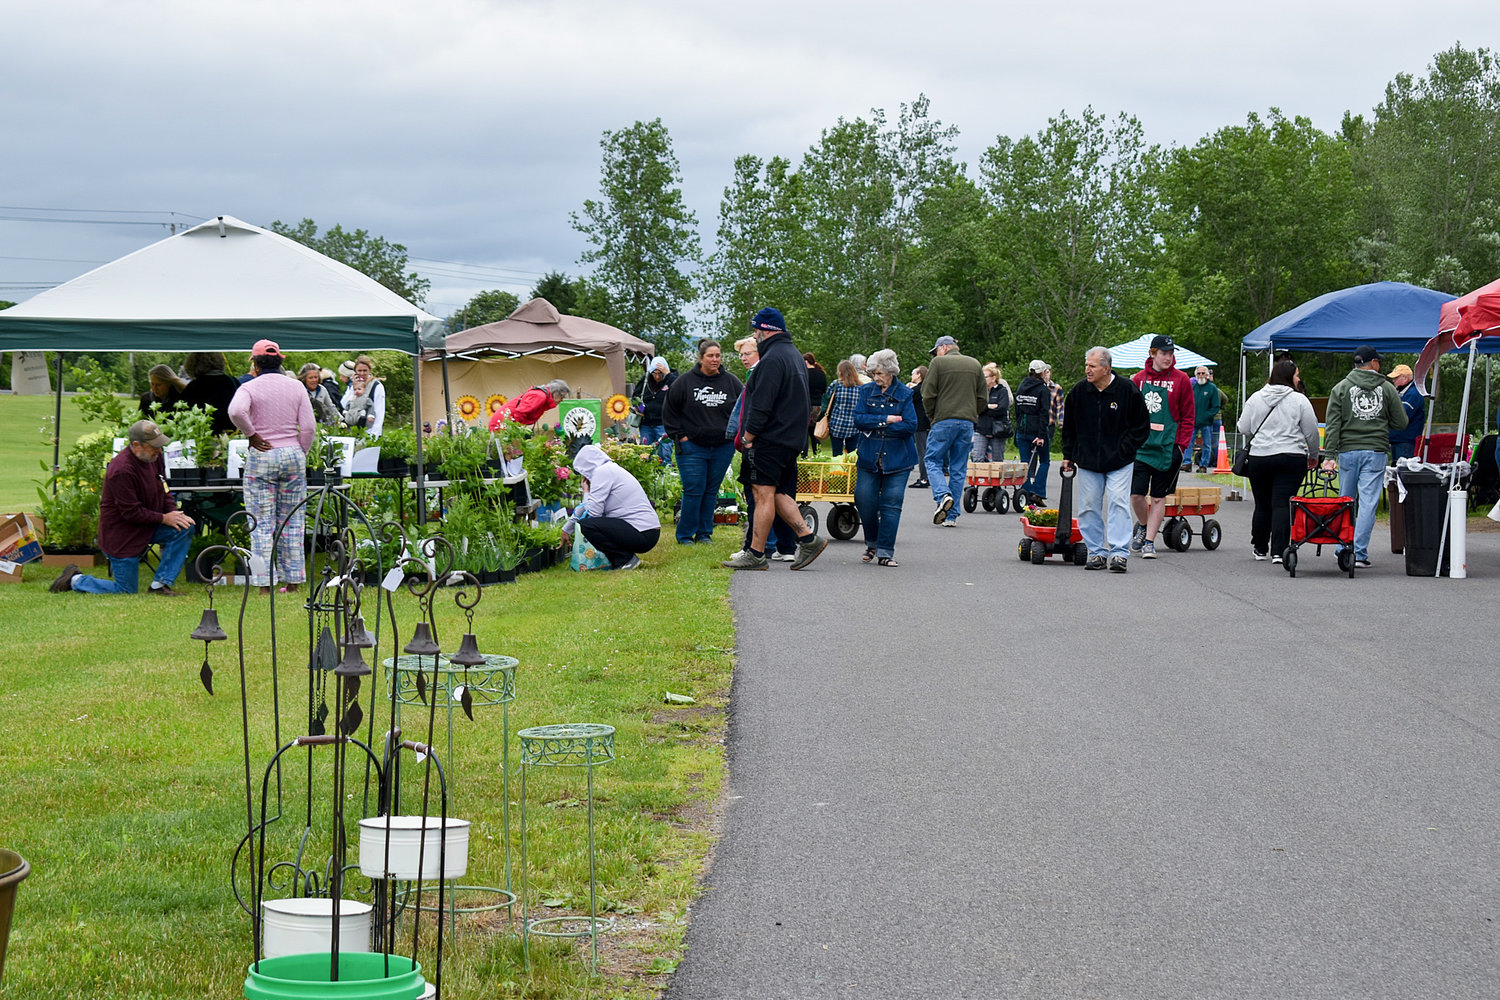 Cold temperatures and cloudy skies didn’t keep attendees away from the recent Herb and Flower Festival as almost 800 people attended the event hosted at the Oneida County Farm & Home Center, 121 Second St. in Whitestown.